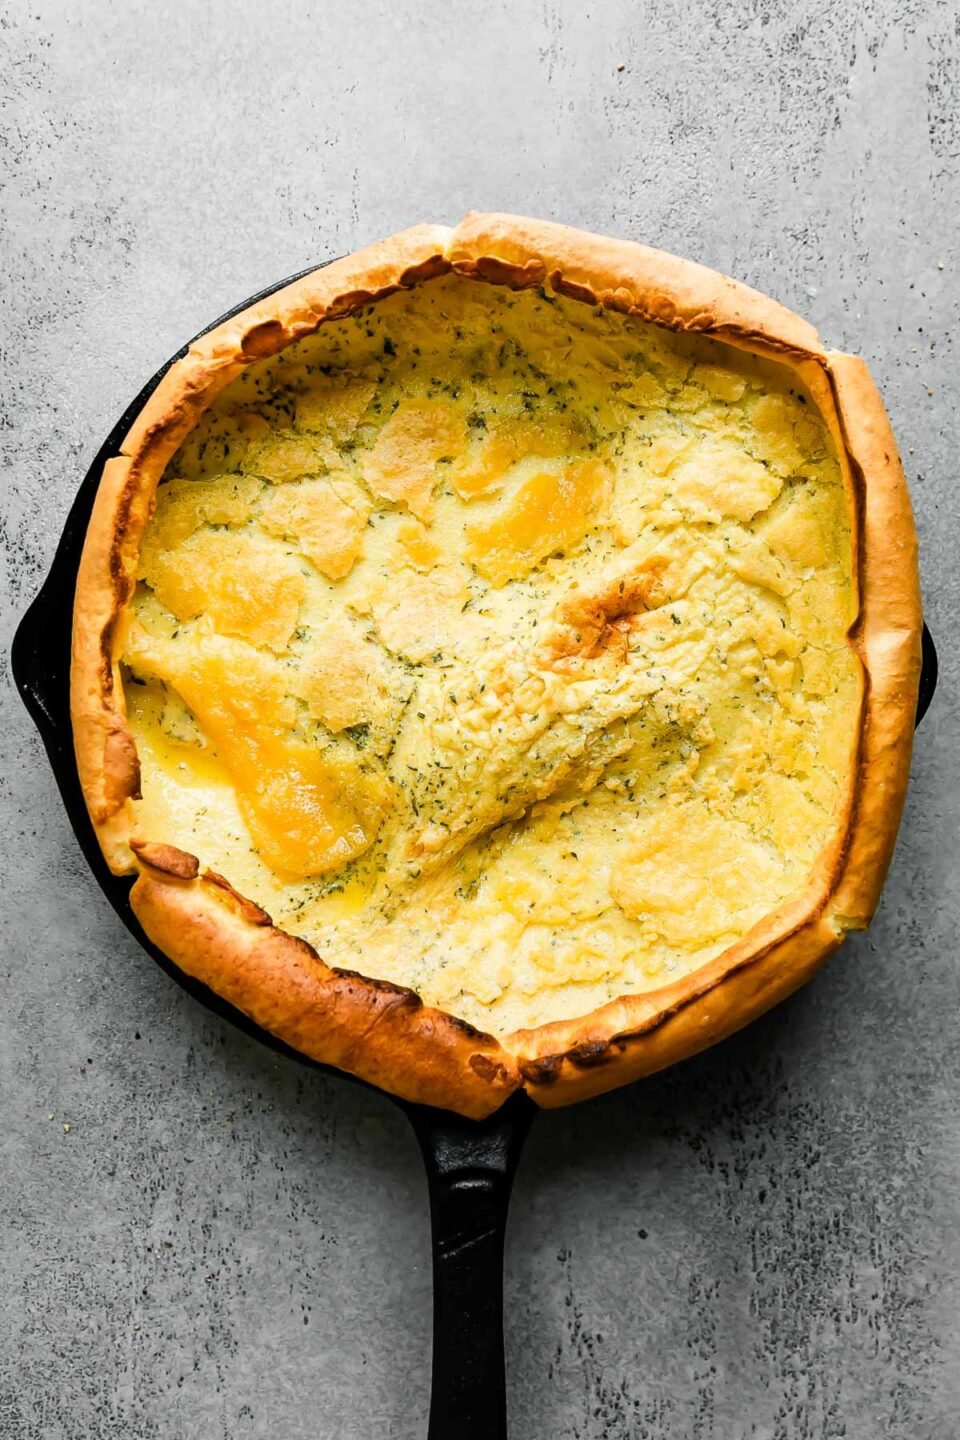 A baked savory dutch baby fills a large black cast iron skillet that sits atop a light gray textured surface.